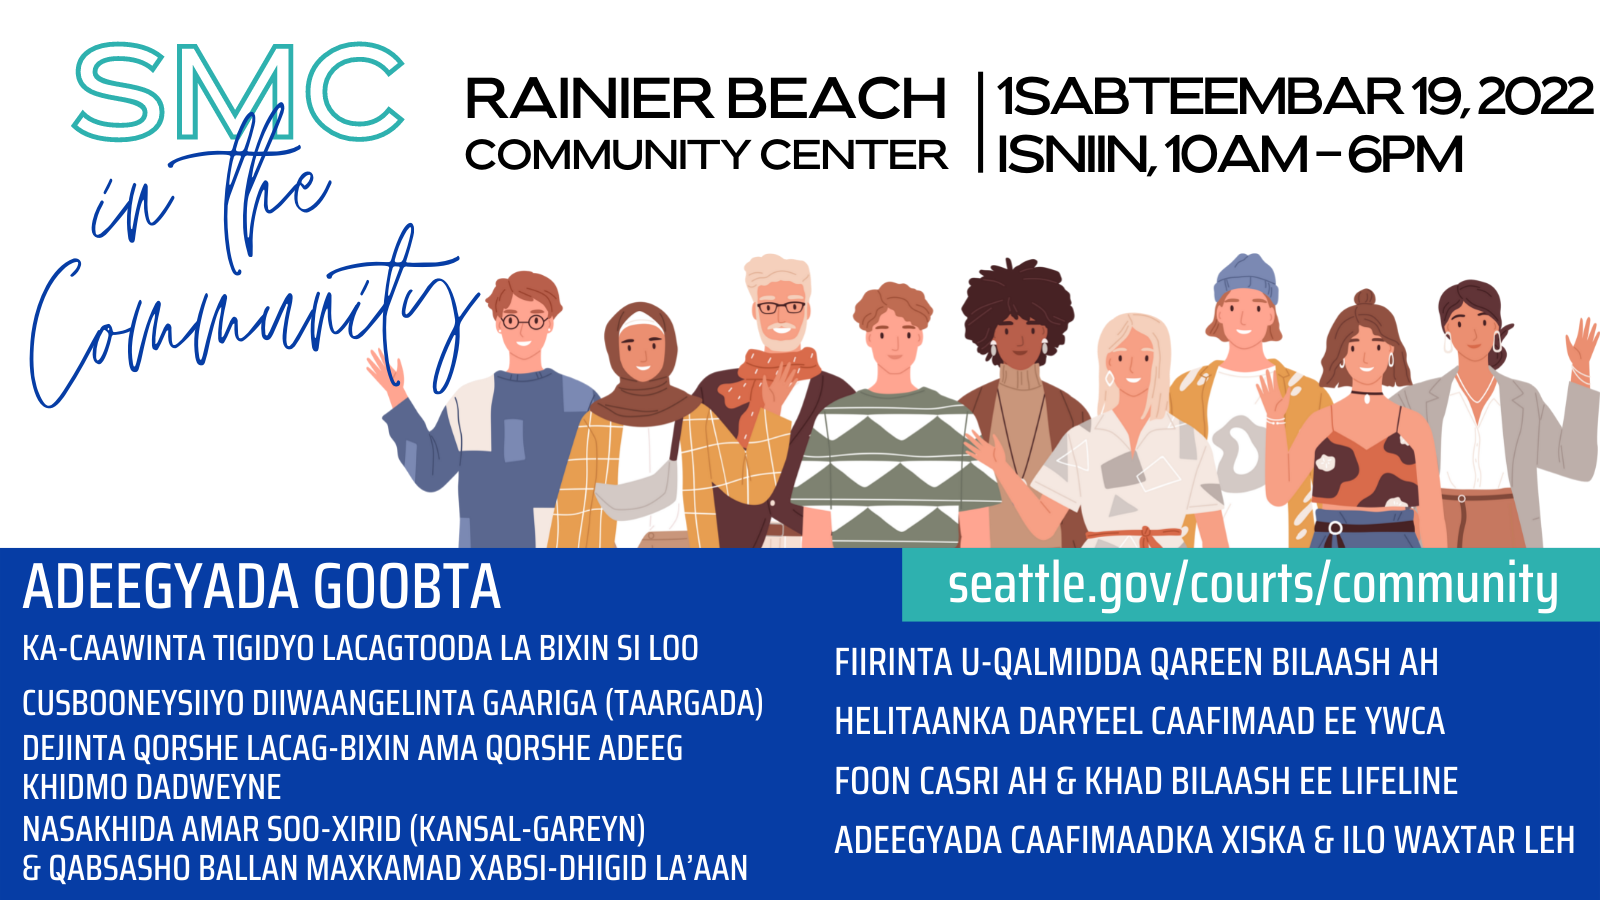 SMC in the Community event banner with a group of smiling and waving cartoon people and event info in Somali